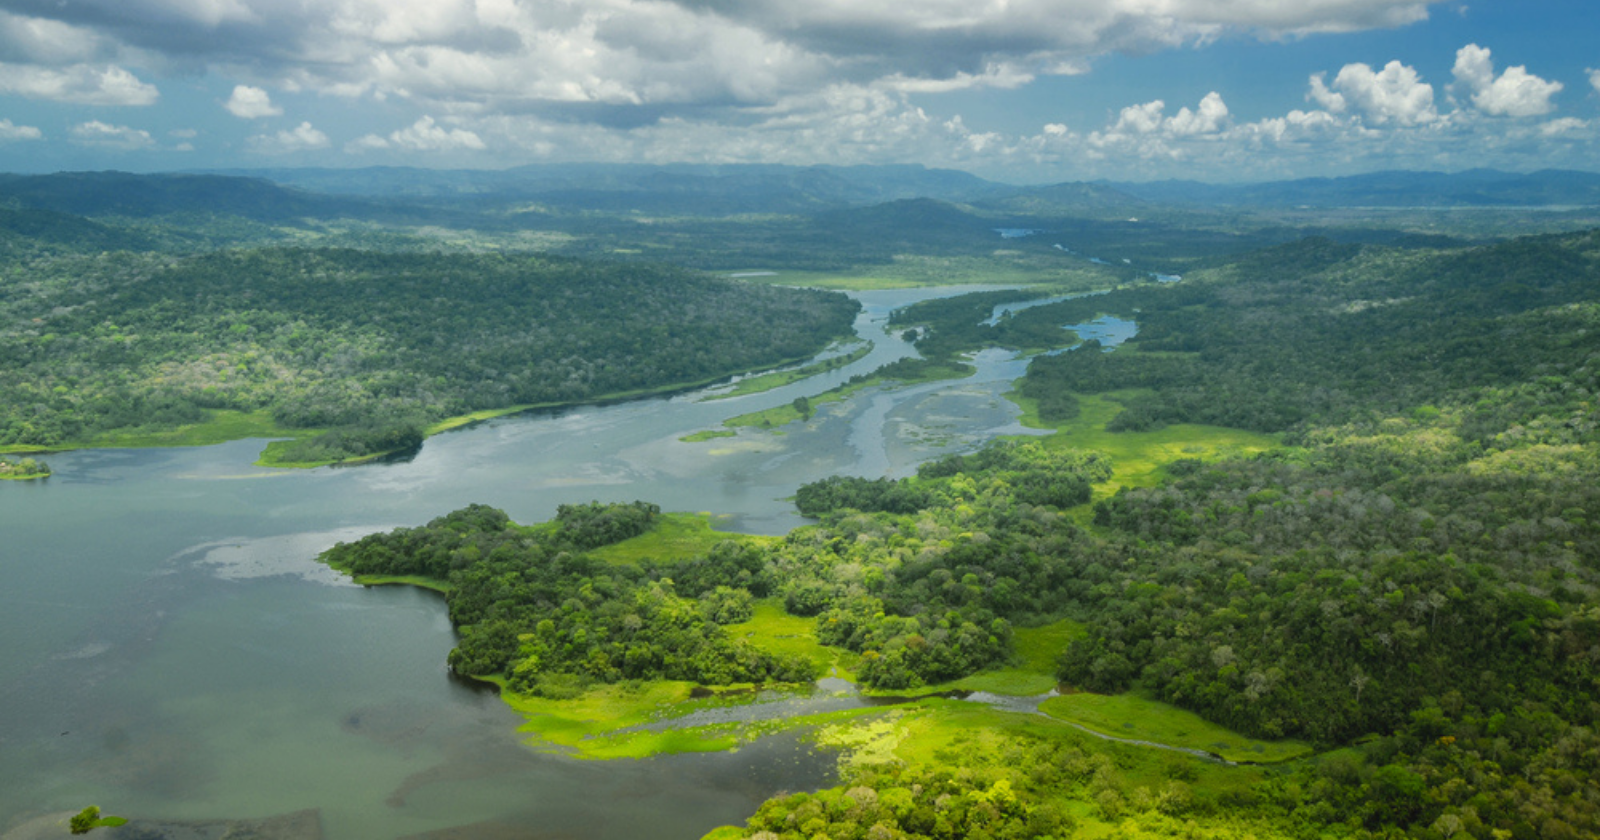 Panama: A law gives nature "the right to exist, endure and regenerate its cycles"￼